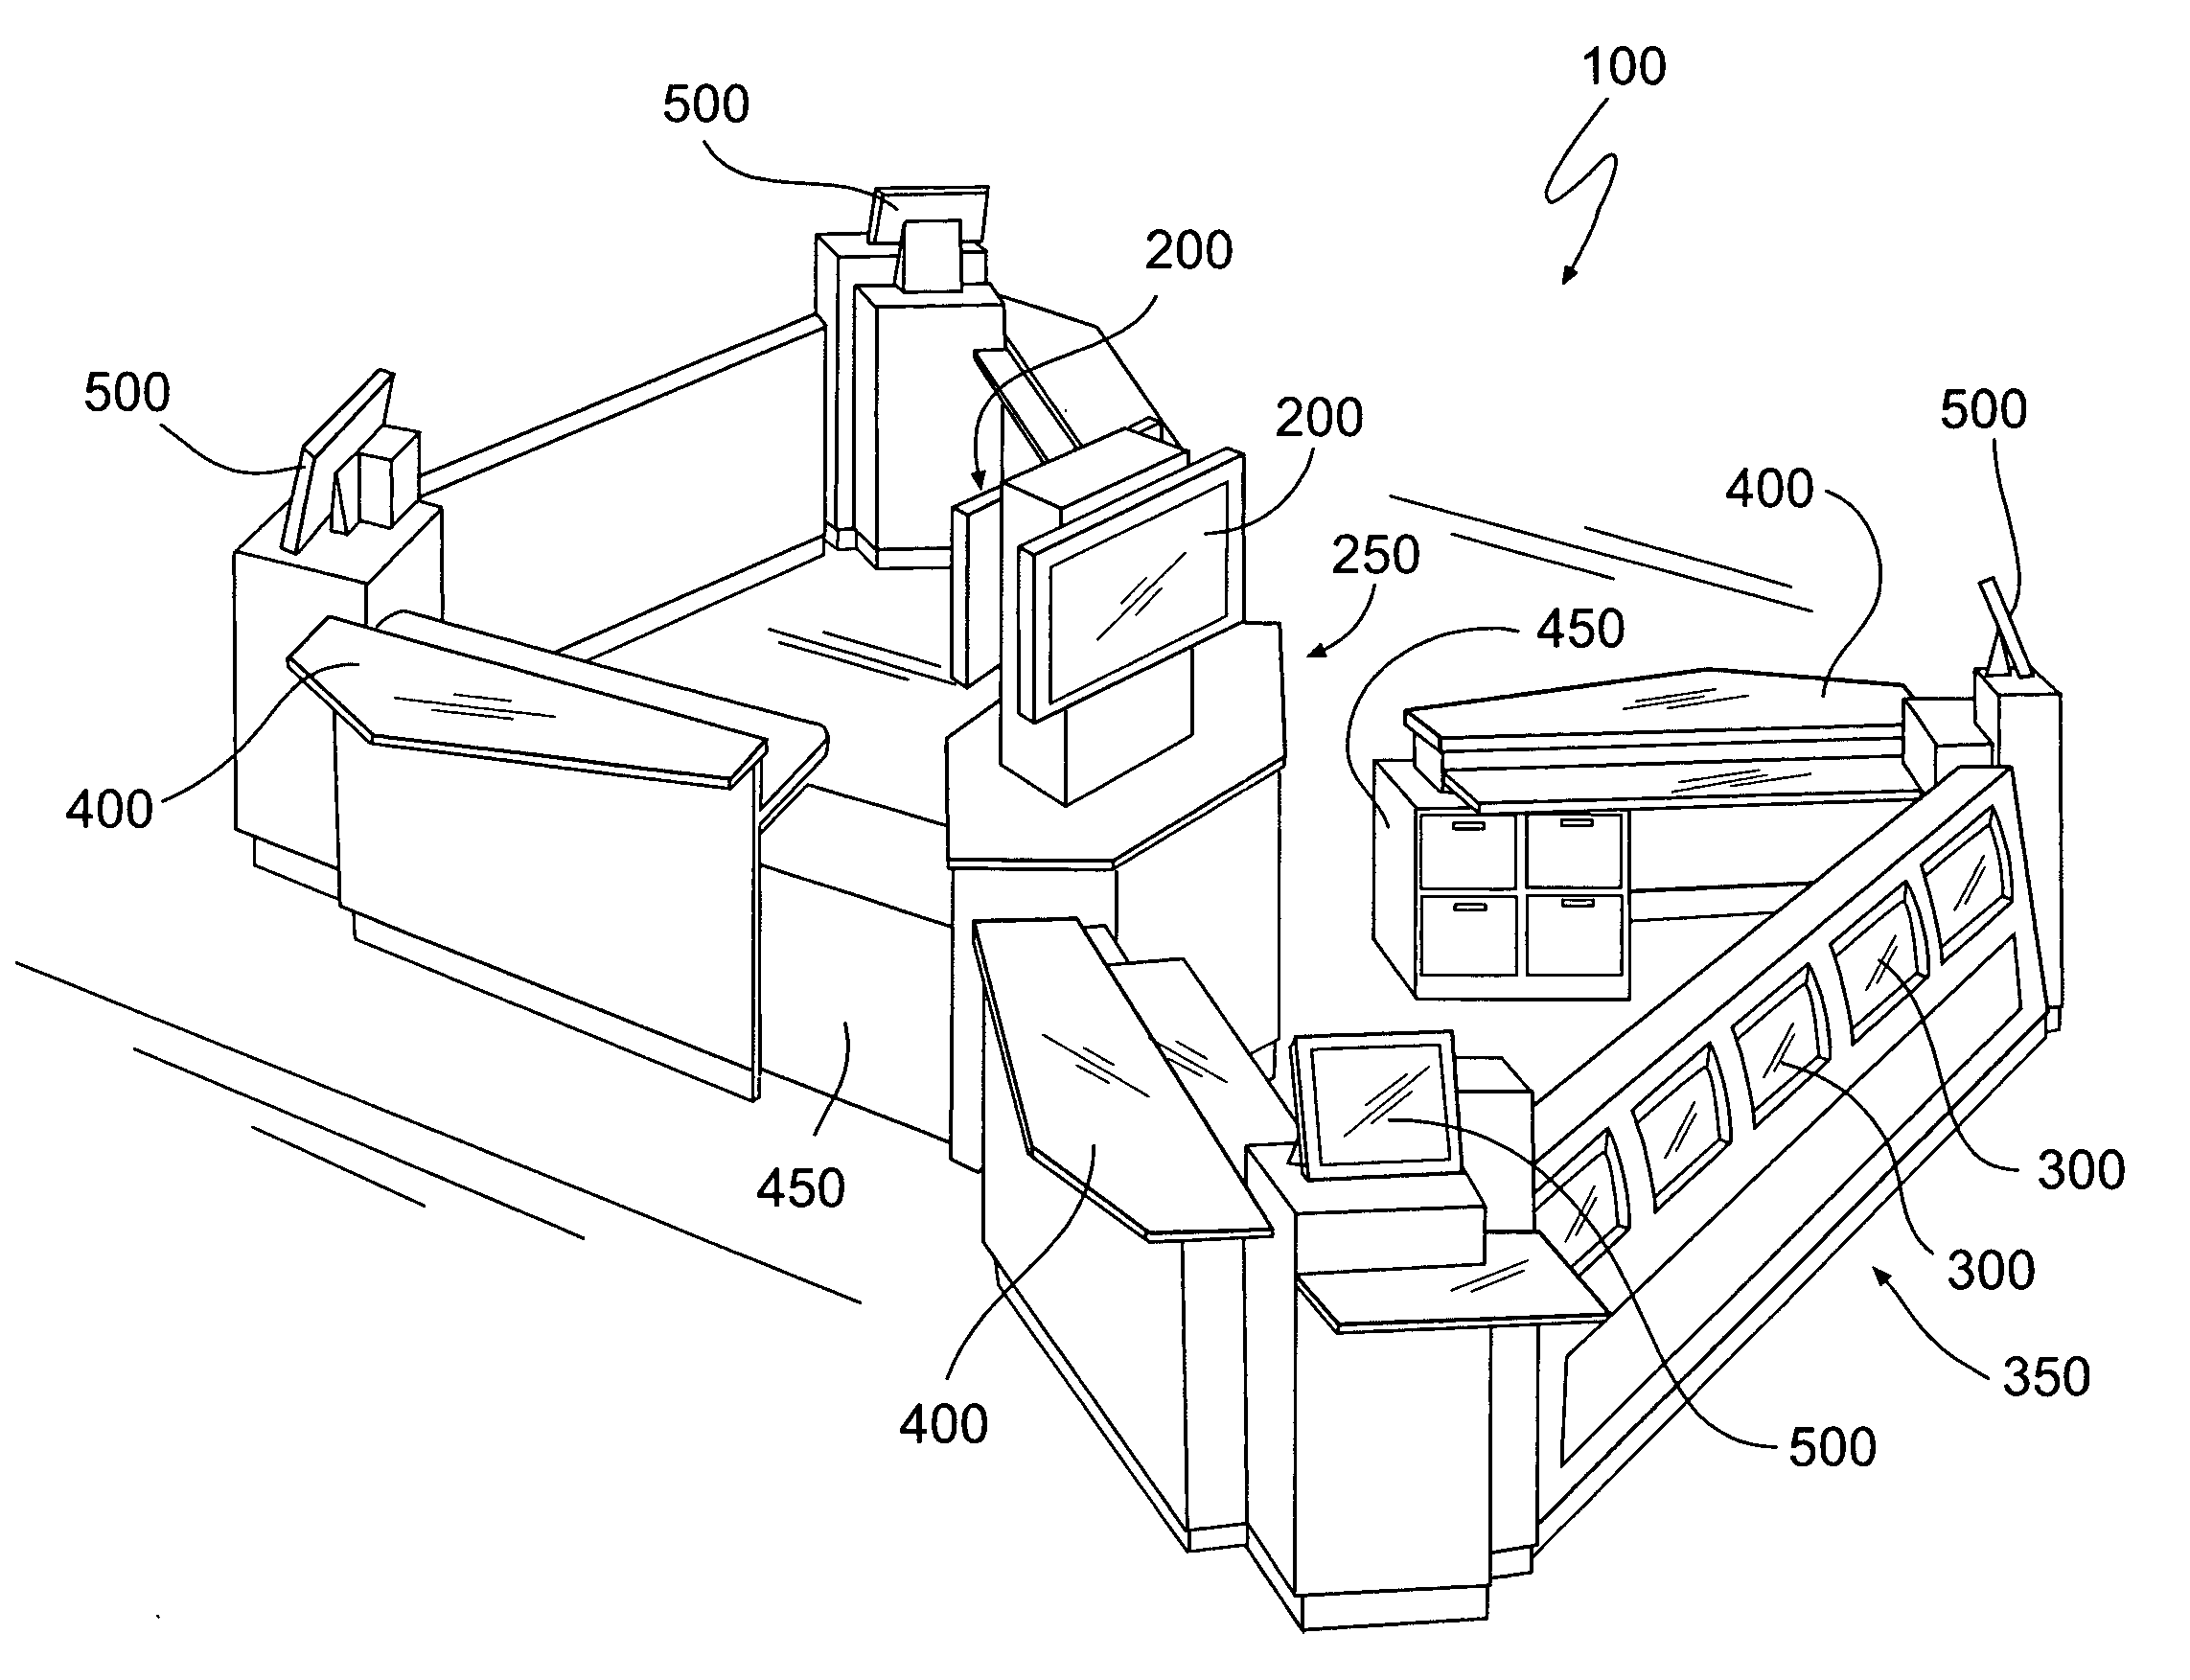 Presentation system and associated method